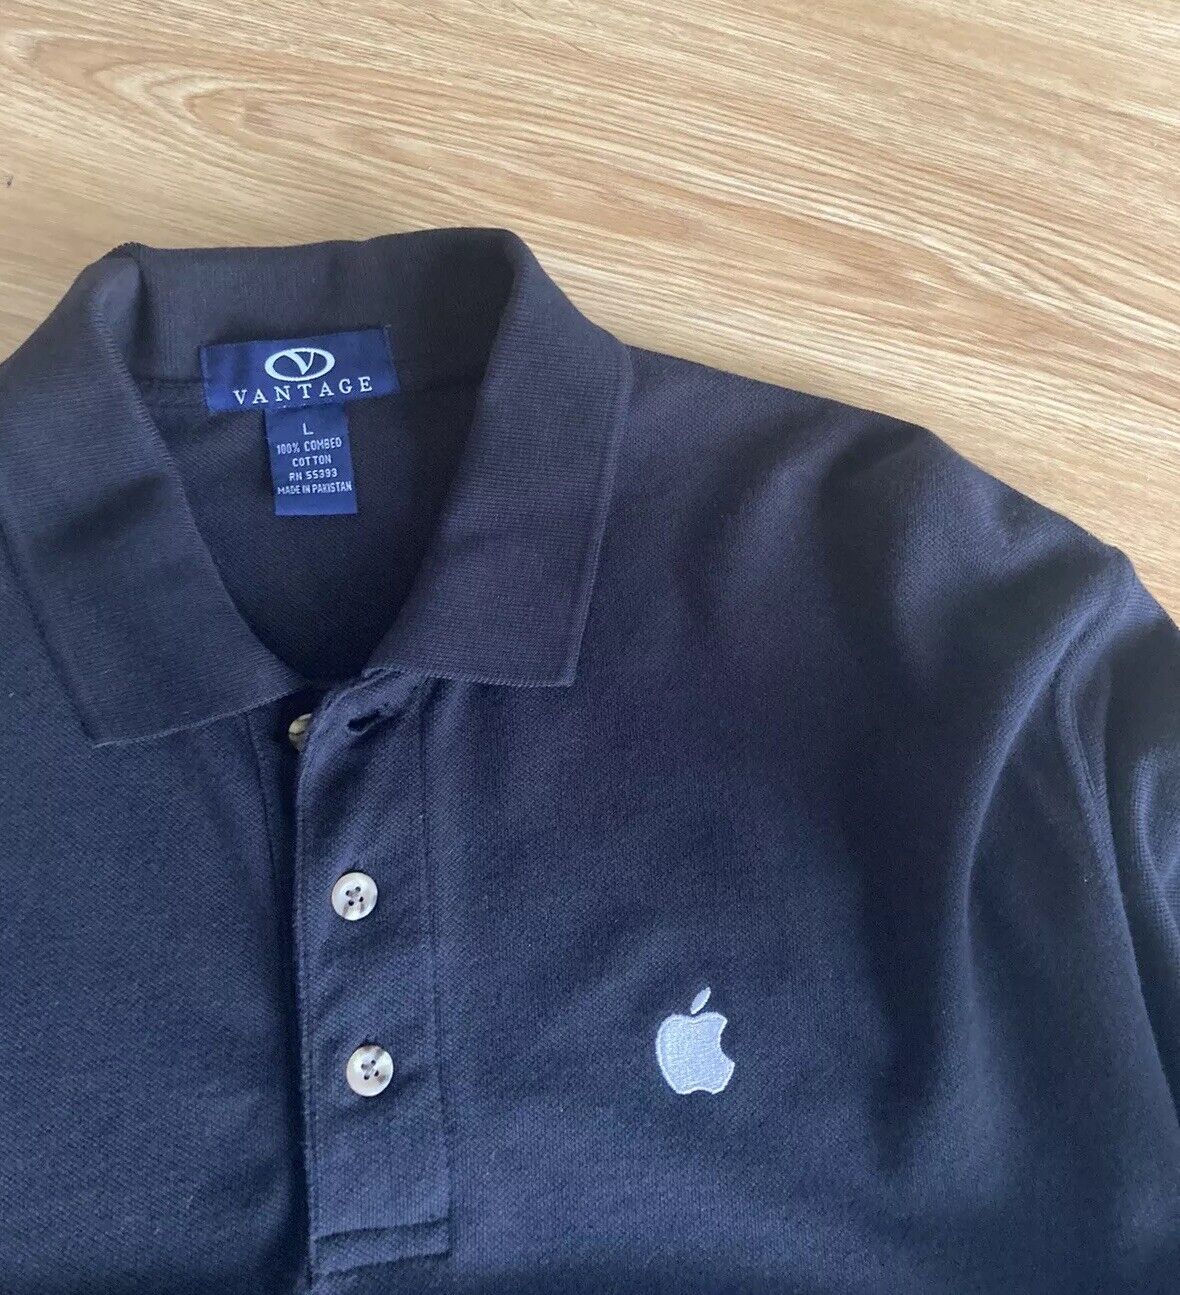 Apple Computers Employee Polo Shirt Black w/ White Apple Logo Embroidered Size L